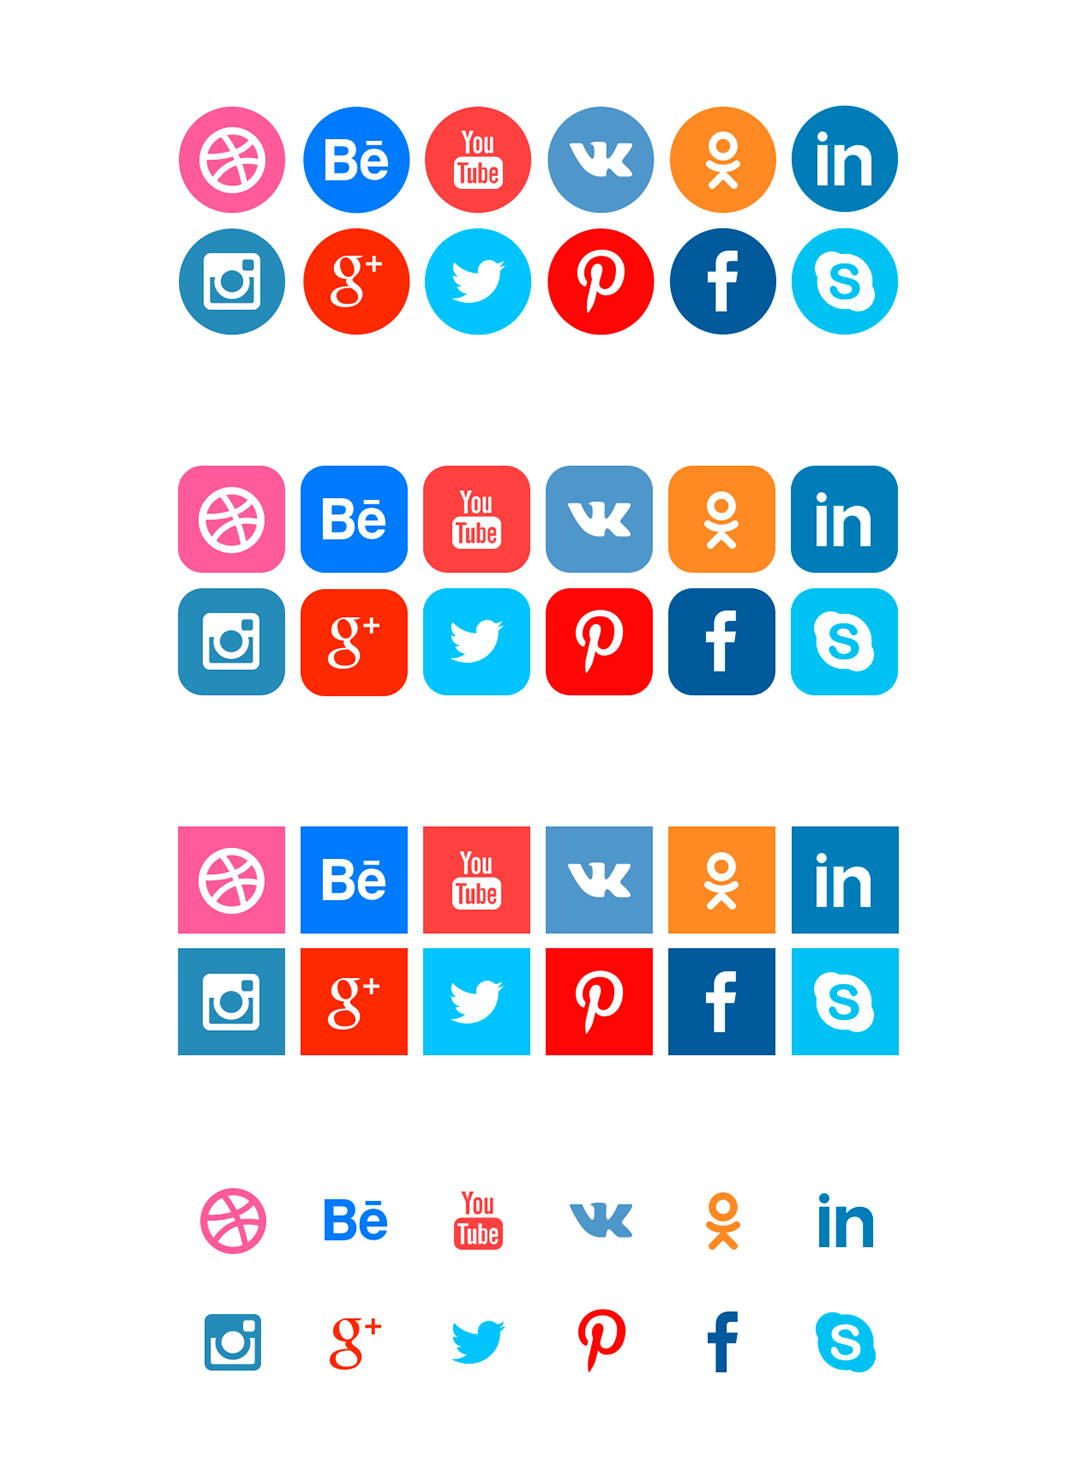 Free Social Network Icons - 4 Options and Long Shadows